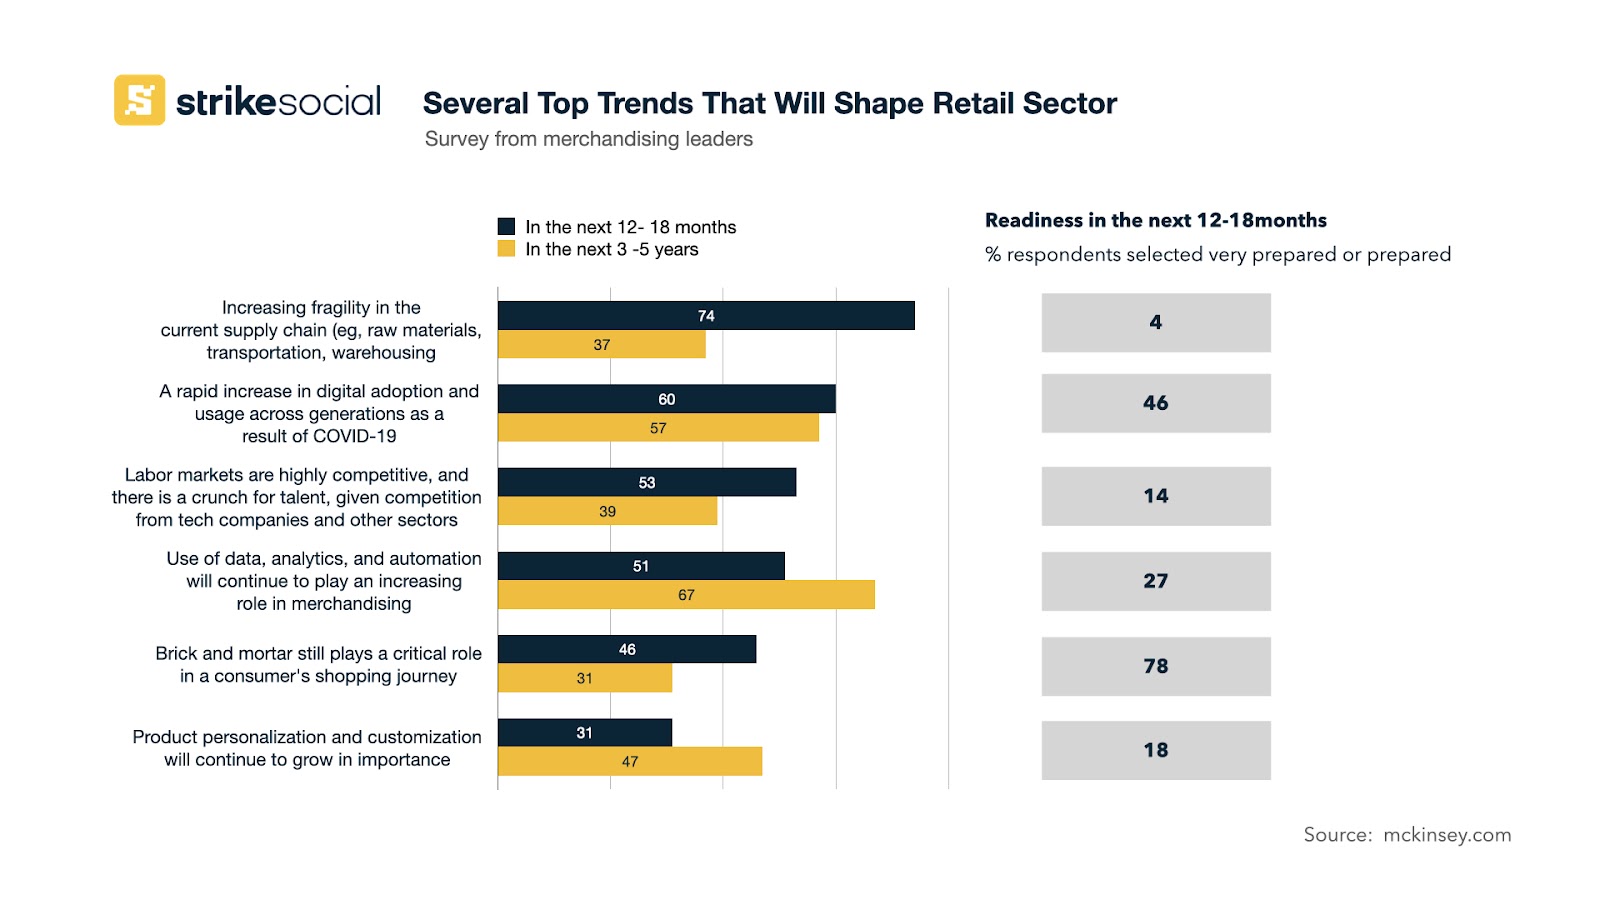 Top Trends That Will Shape Retail Sector